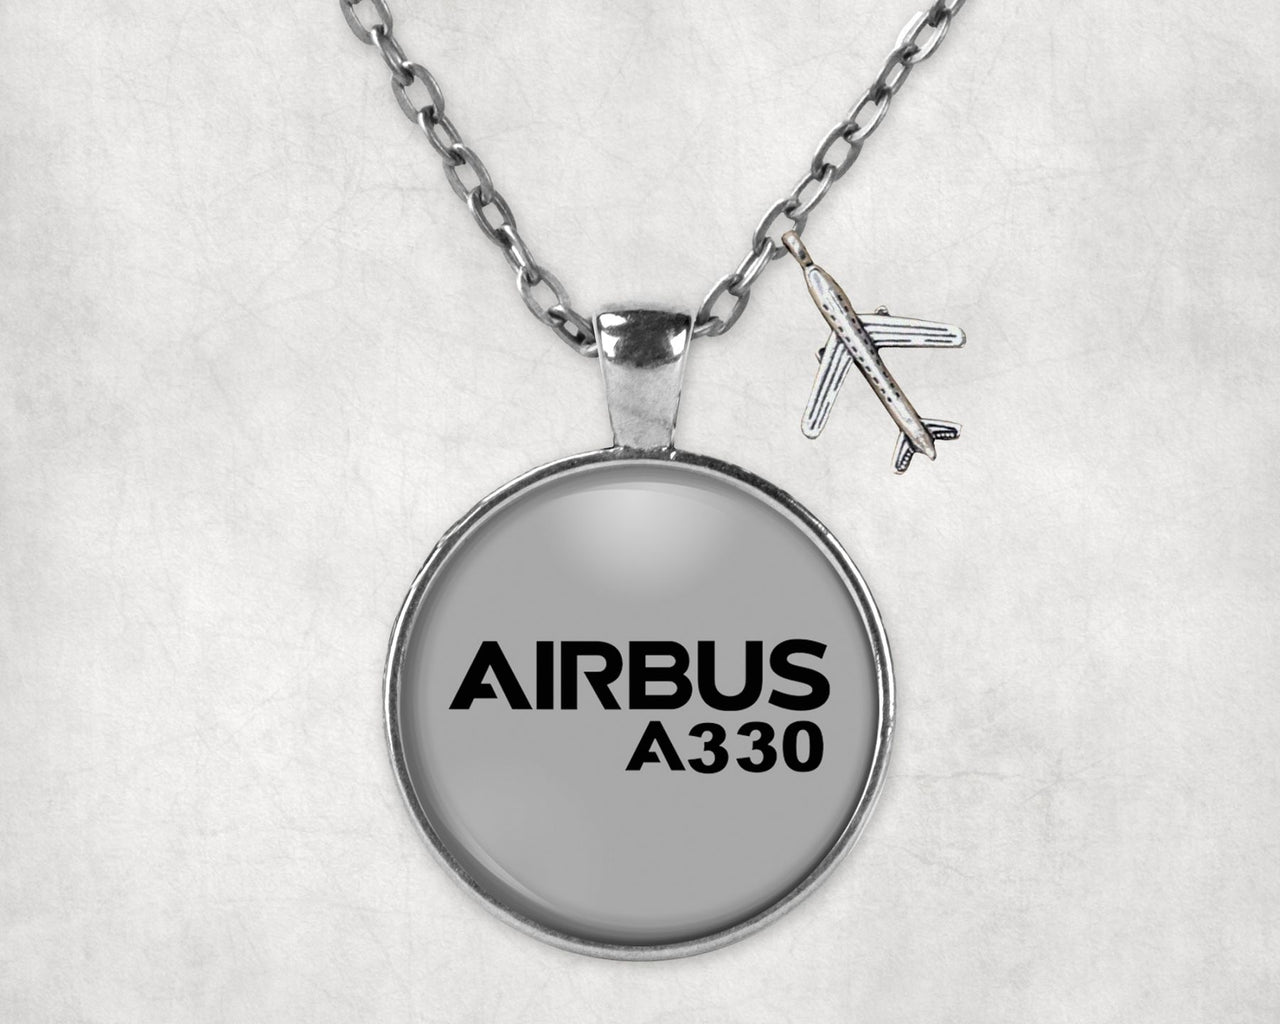 Airbus A330 & Text Designed Necklaces